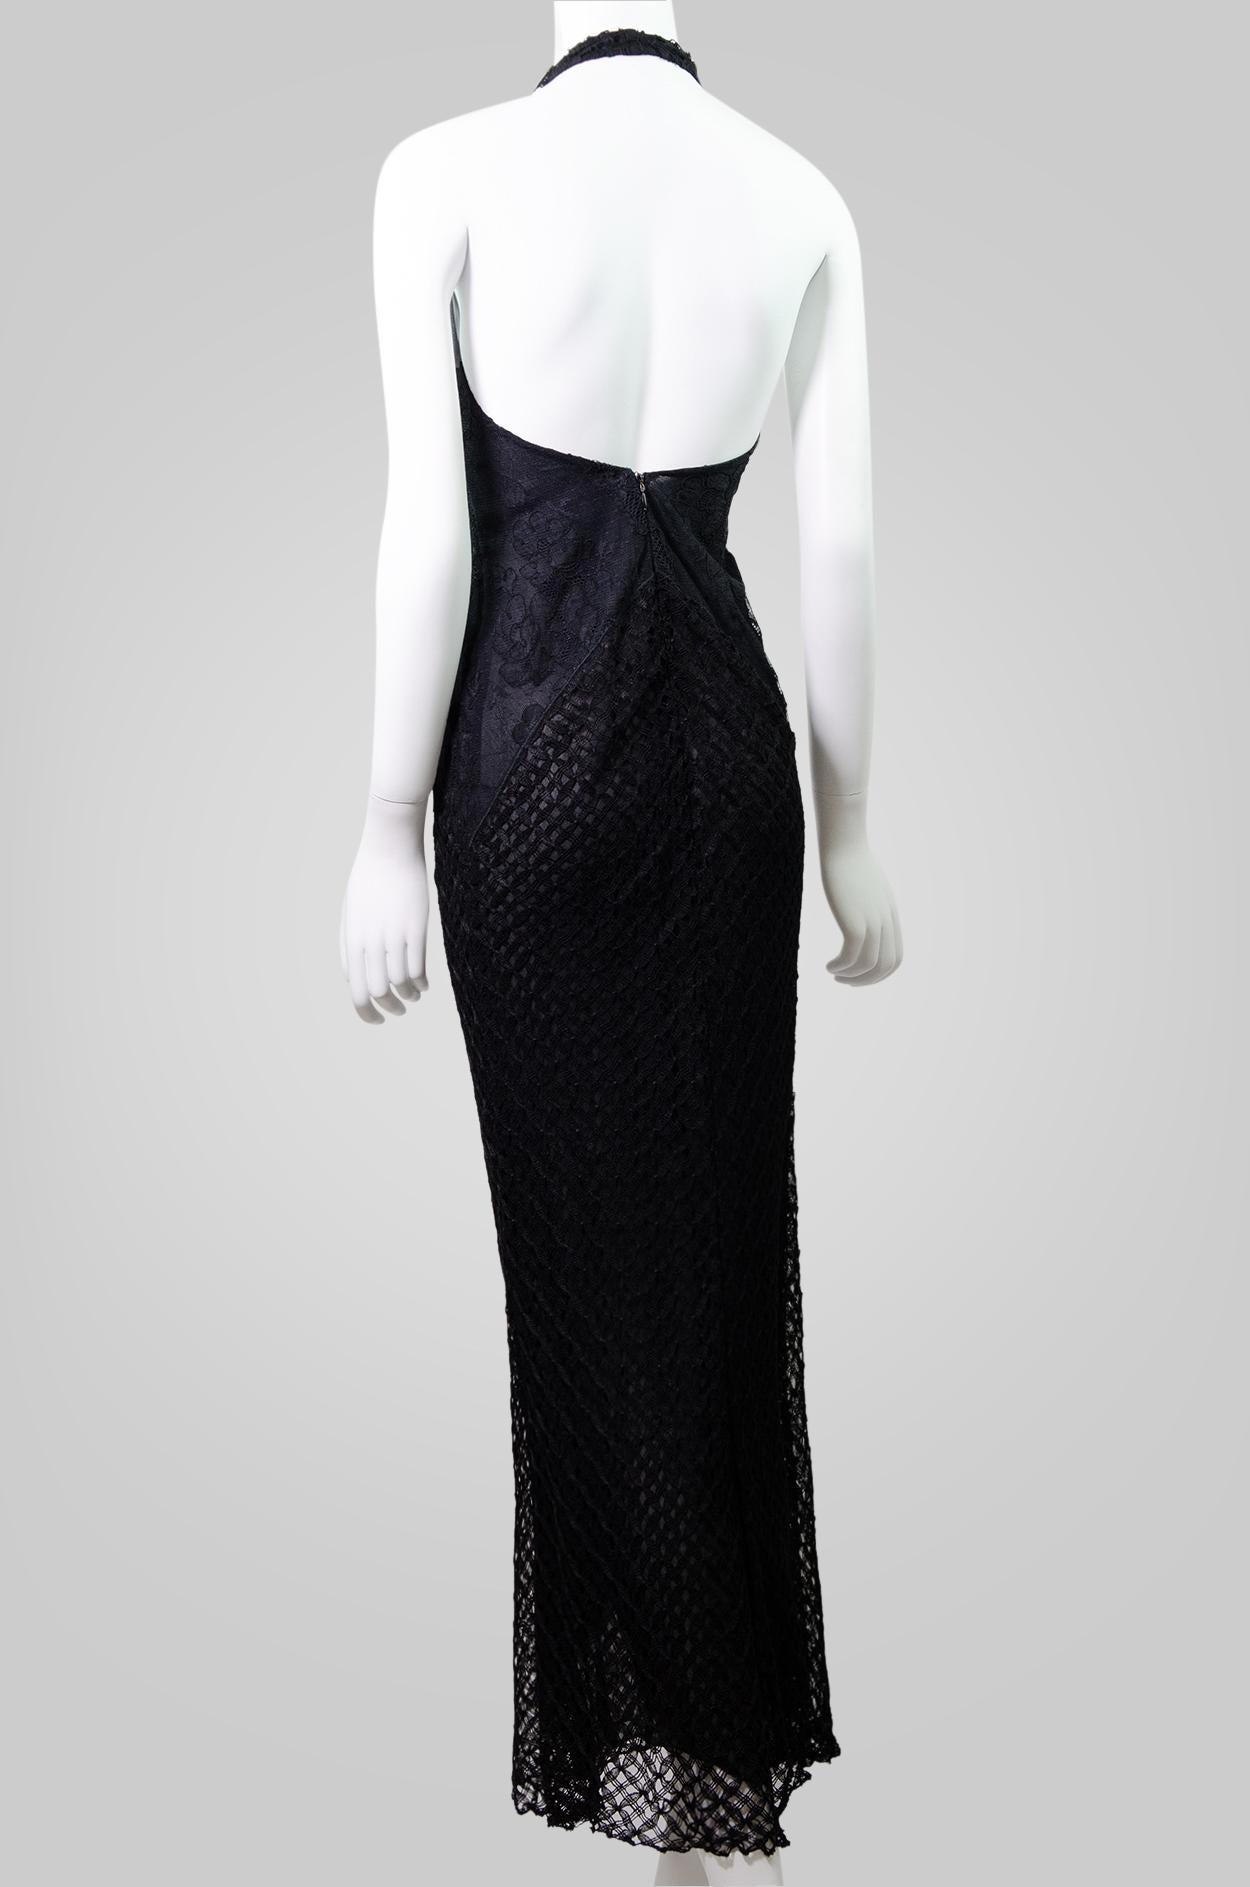 VERSACE S/S 2002 Vintage Sheer Lace Knit Gown  1